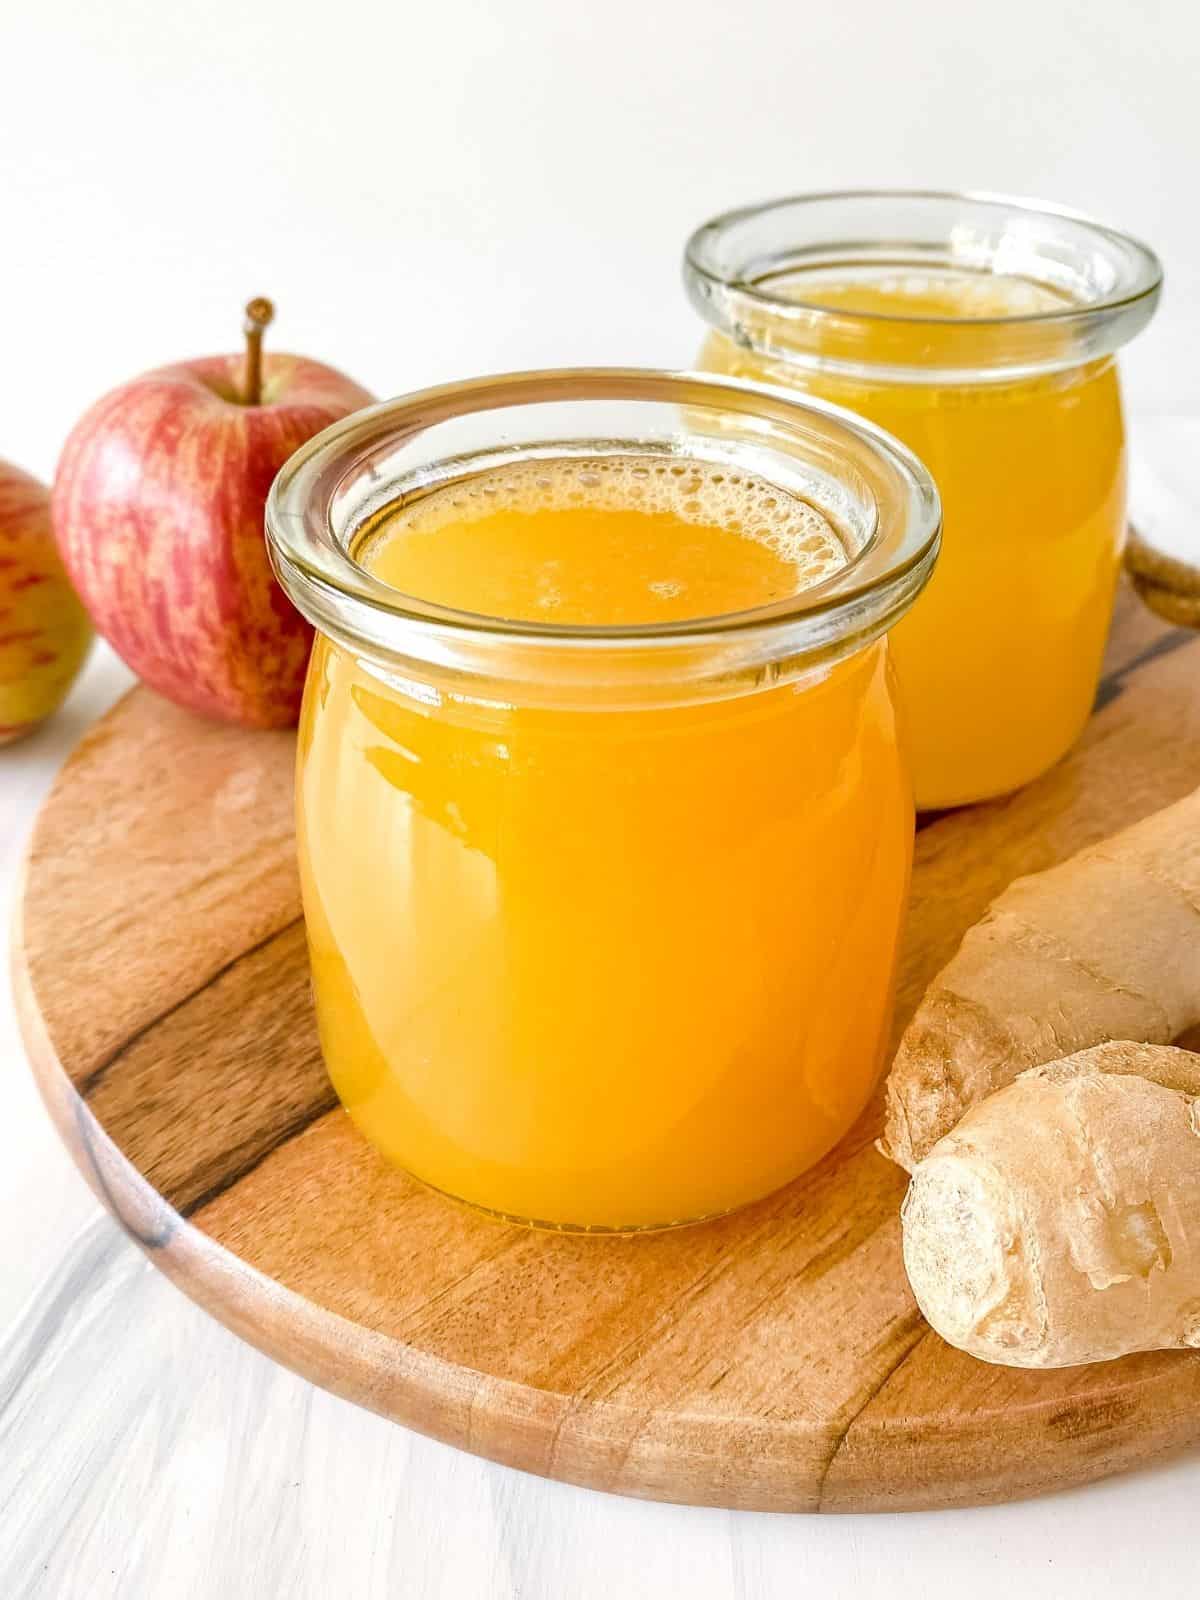 two glasses of apple ginger juice on a wooden board next to ginger root and apples.